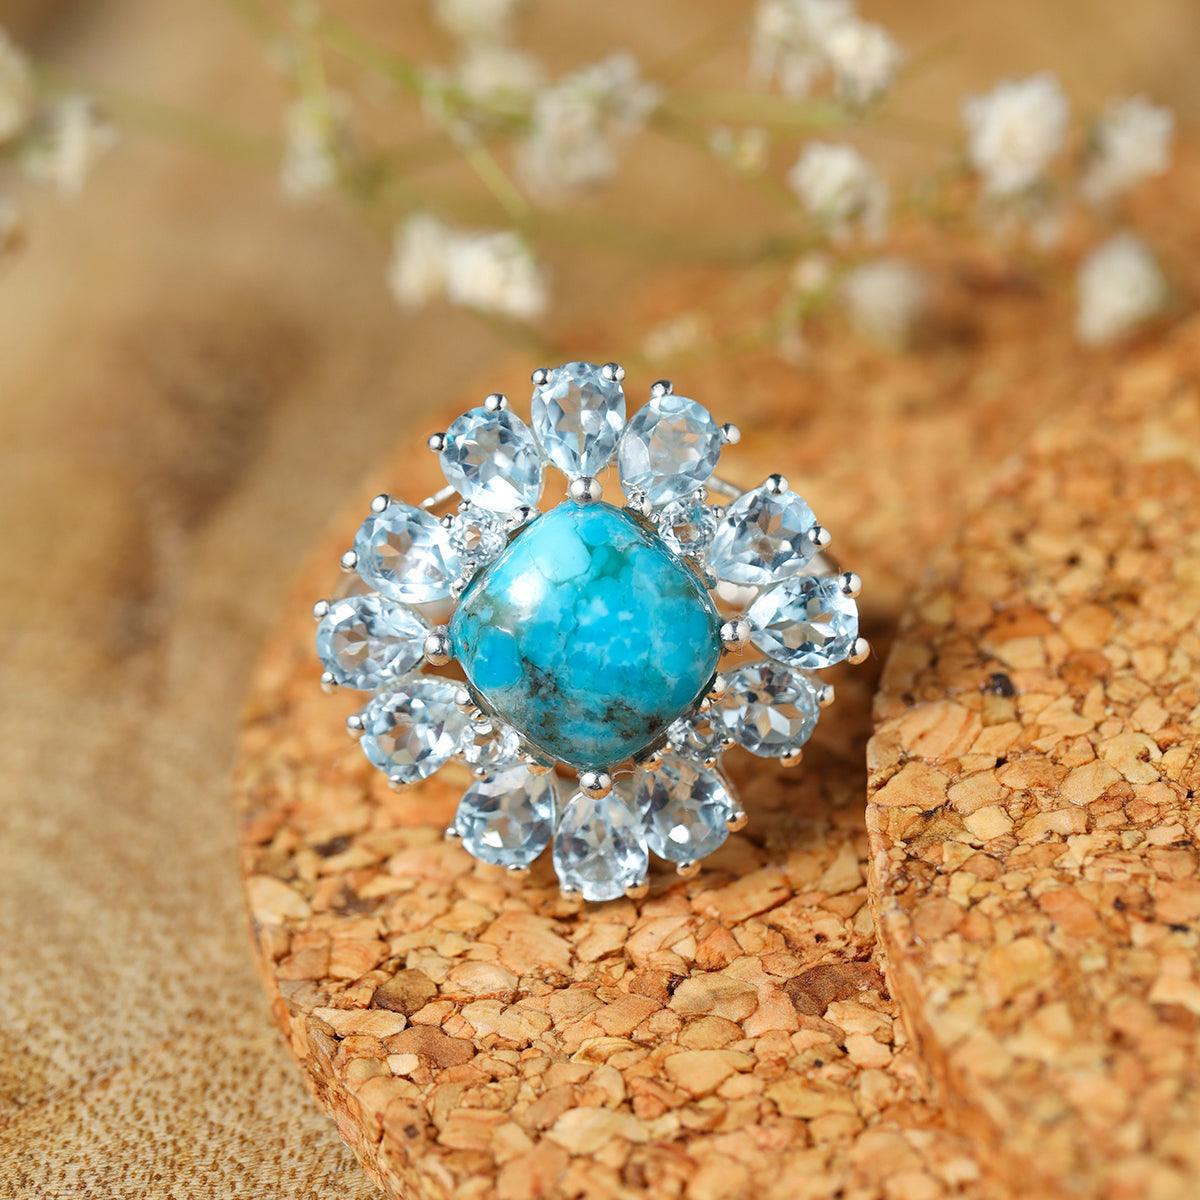 Turquoise & Sky Blue Topaz Ring in 925 Sterling Silver - YoTreasure